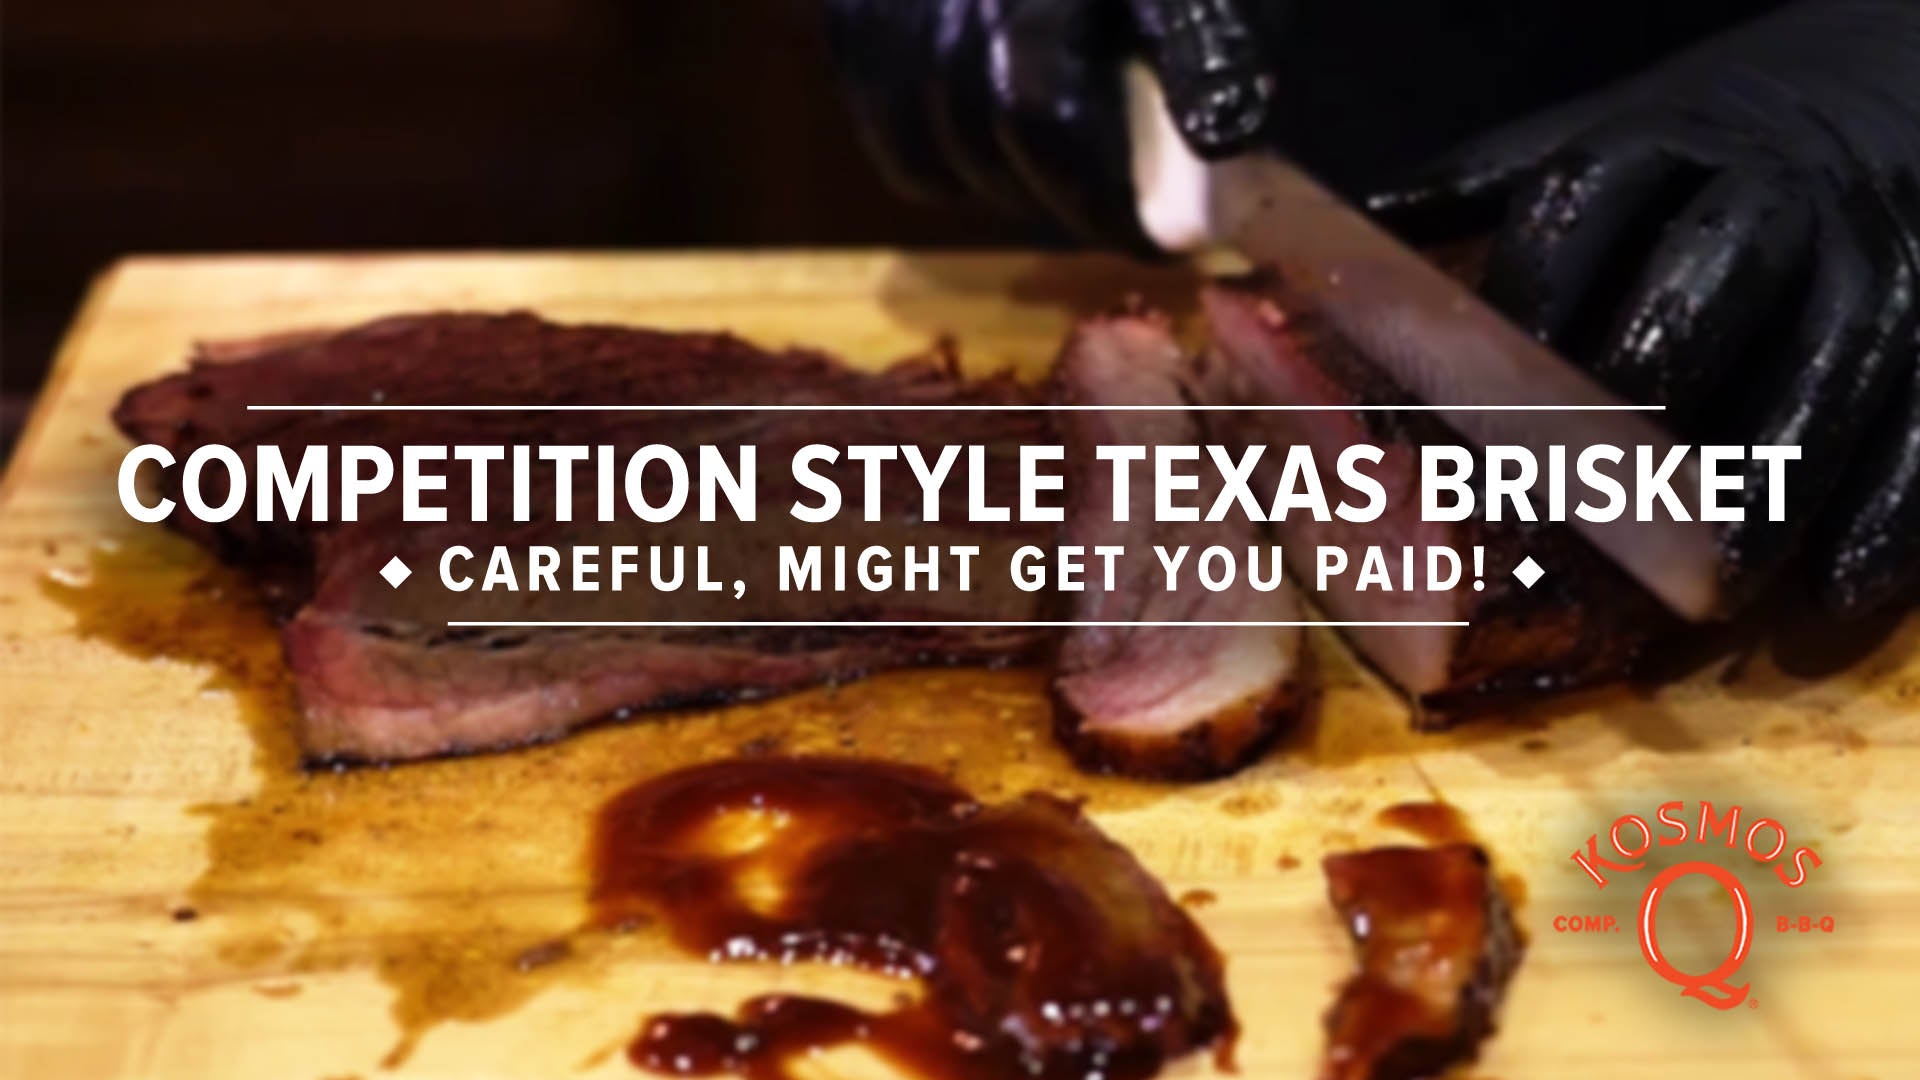 The PERFECT Competition Texas Brisket!